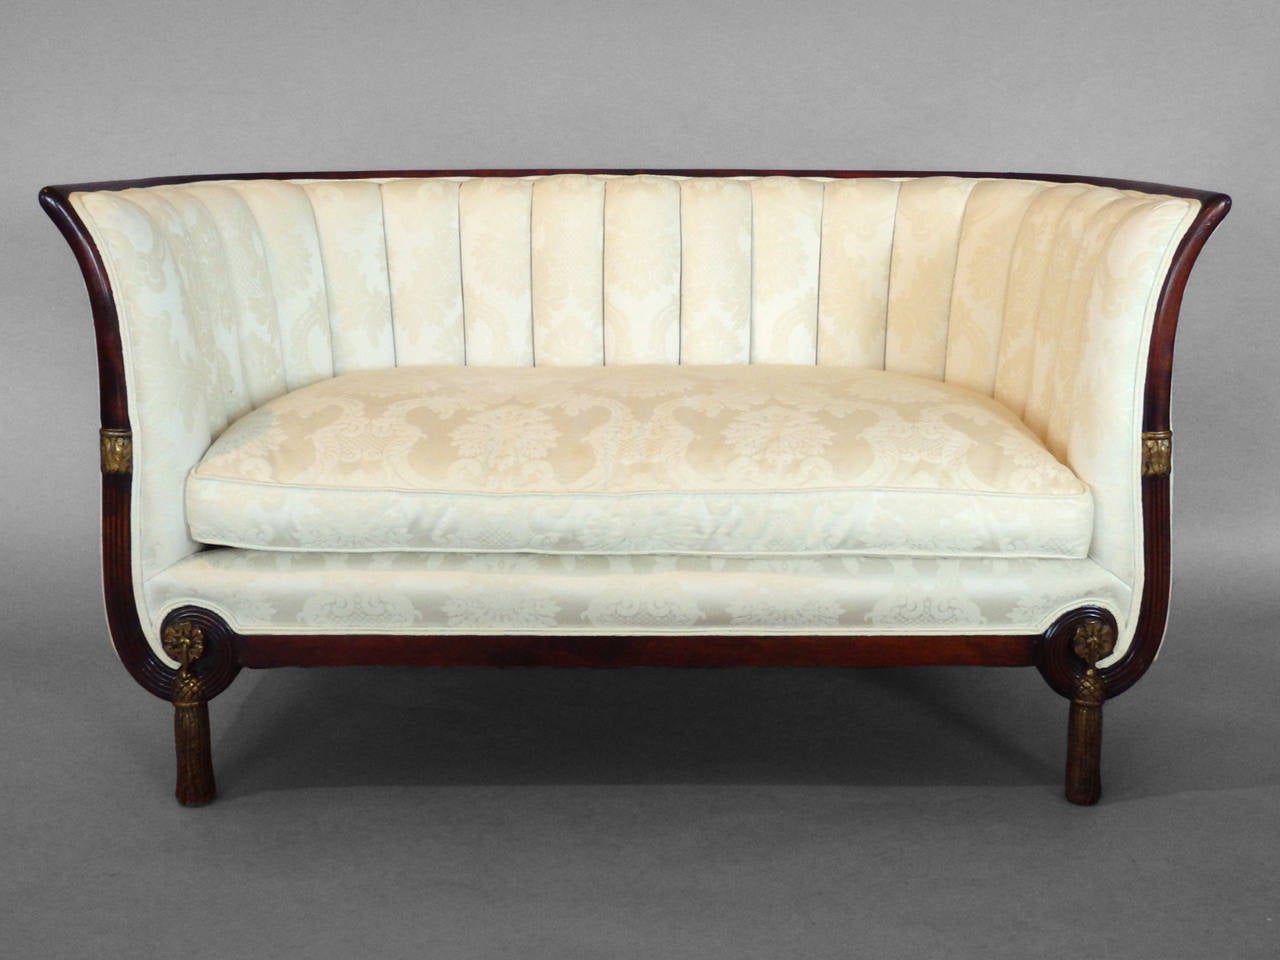 Pair of art moderne settees. Style and quality of Schmieg & Kotzian.